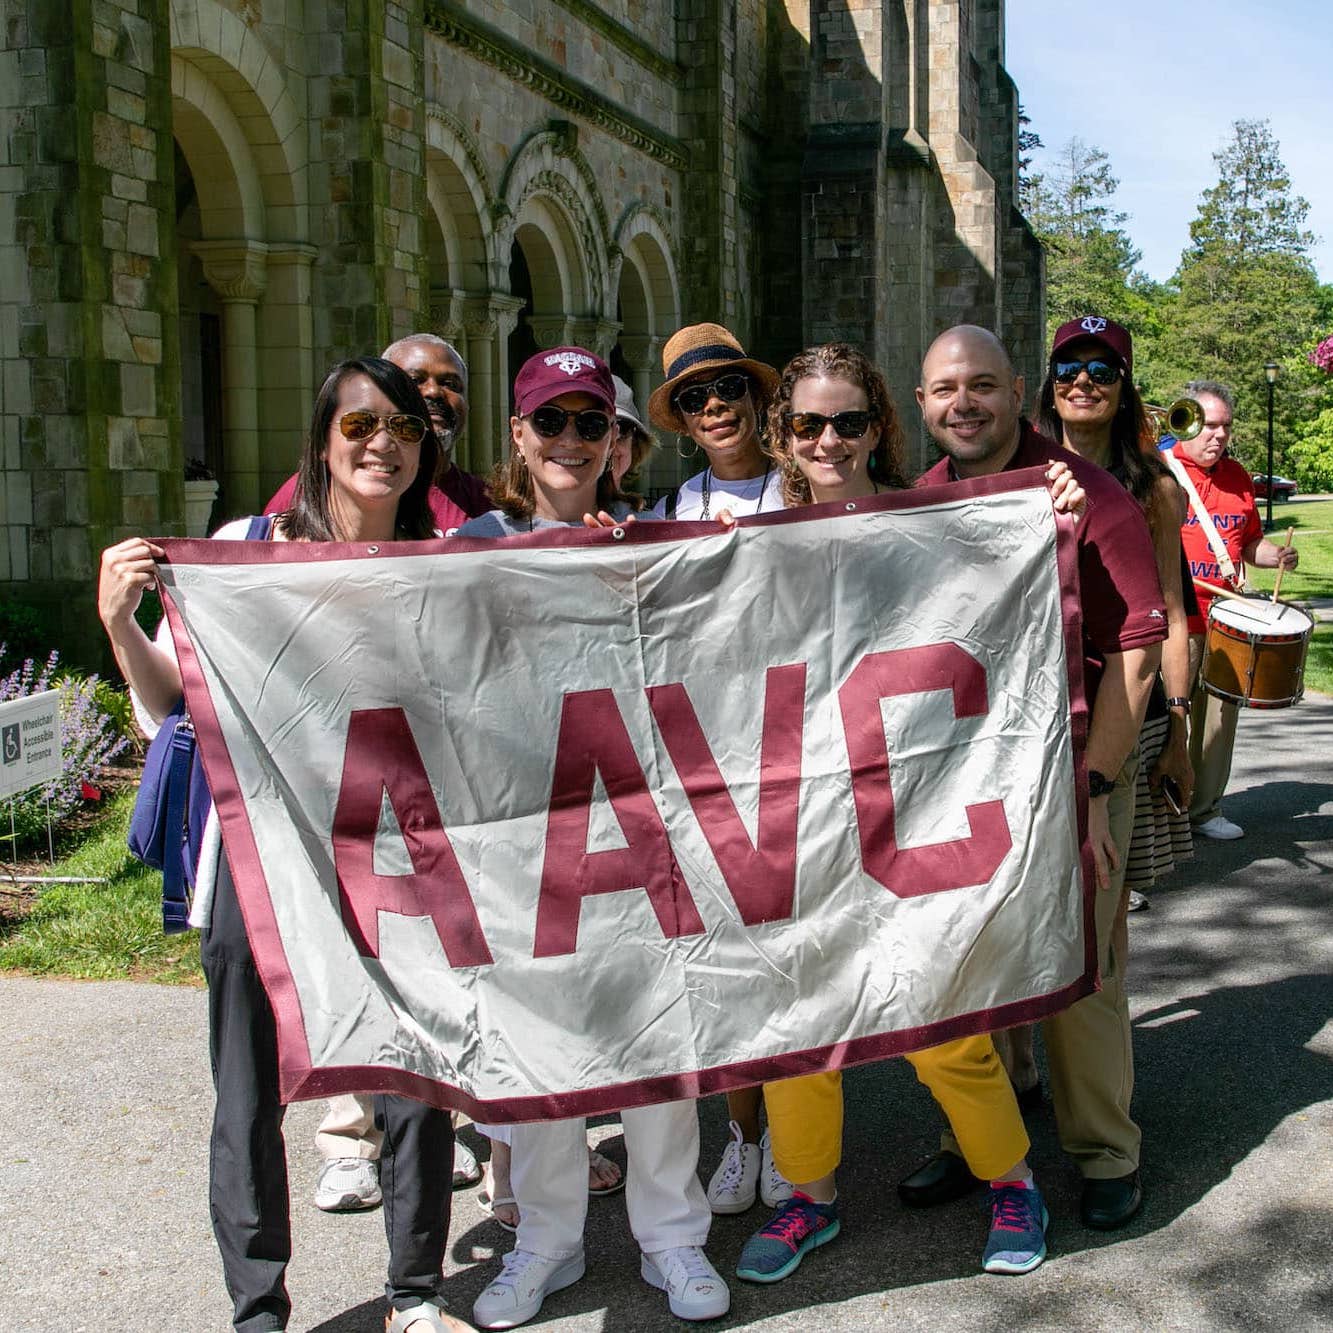 A group of people holding a large grey banner with the letters AAVC on it are smiling at the viewer.